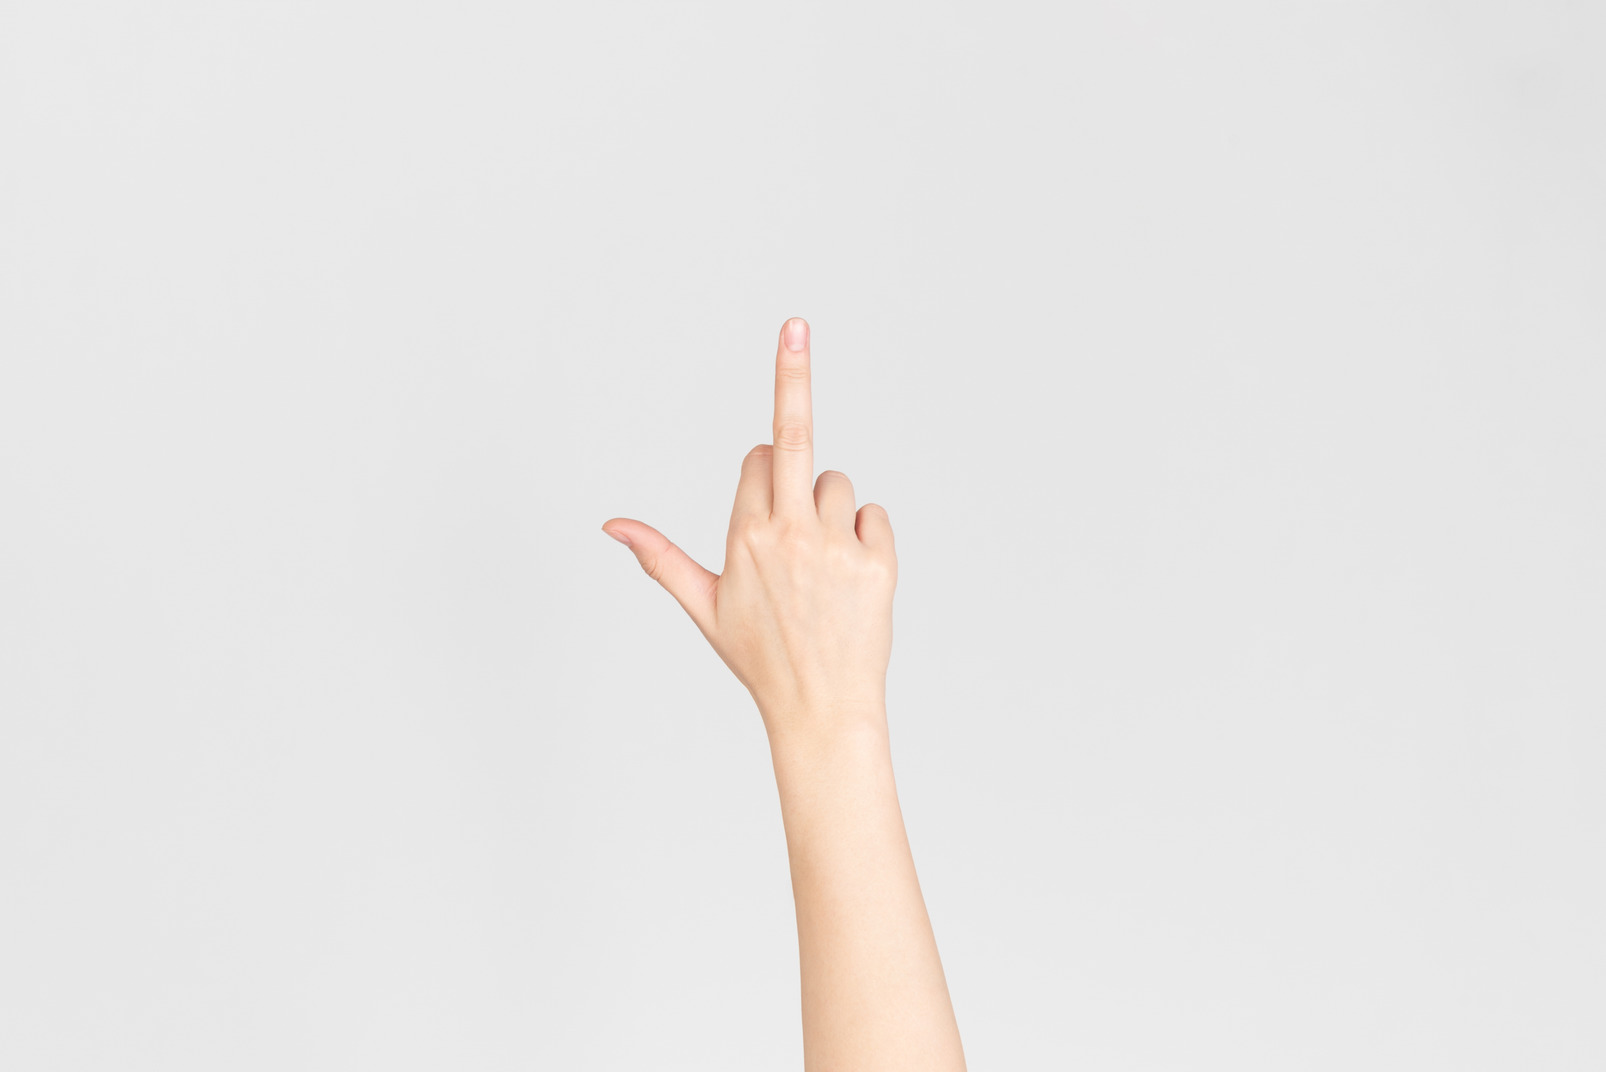 Female hand showing middle finger